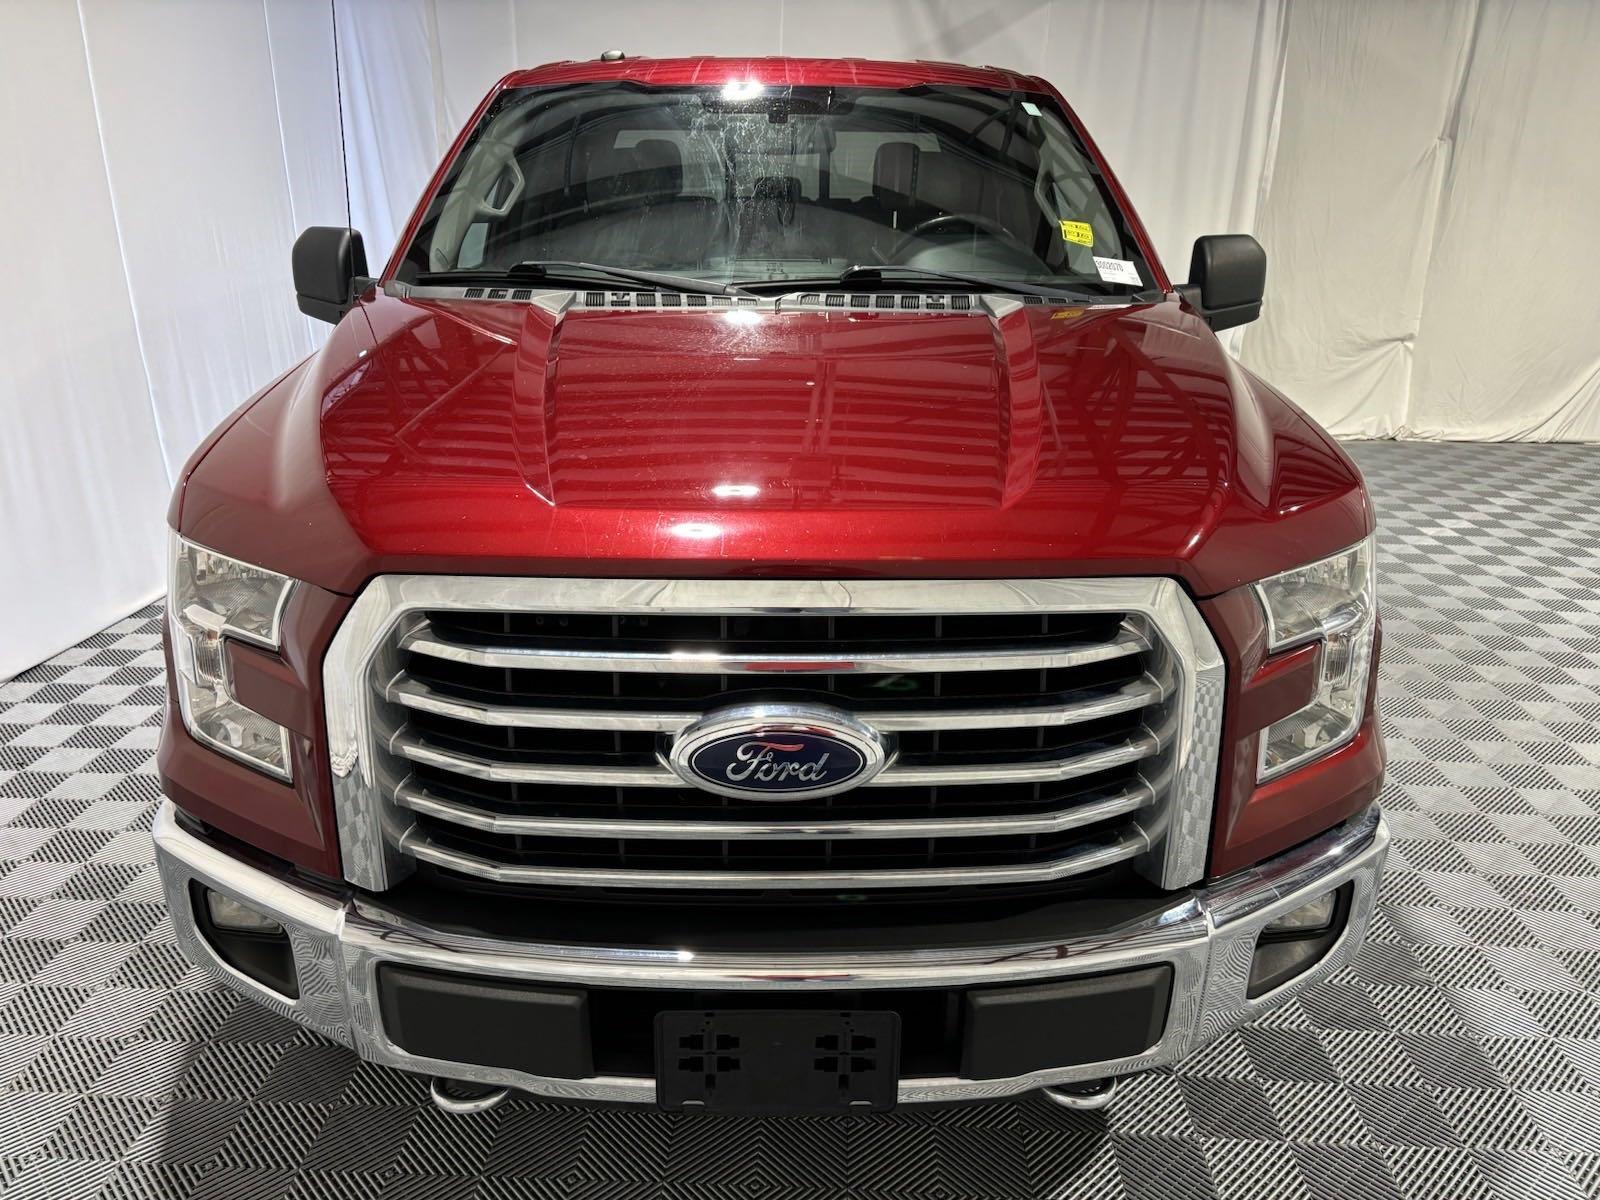 Used 2016 Ford F-150 XLT Crew Cab Truck for sale in St Joseph MO